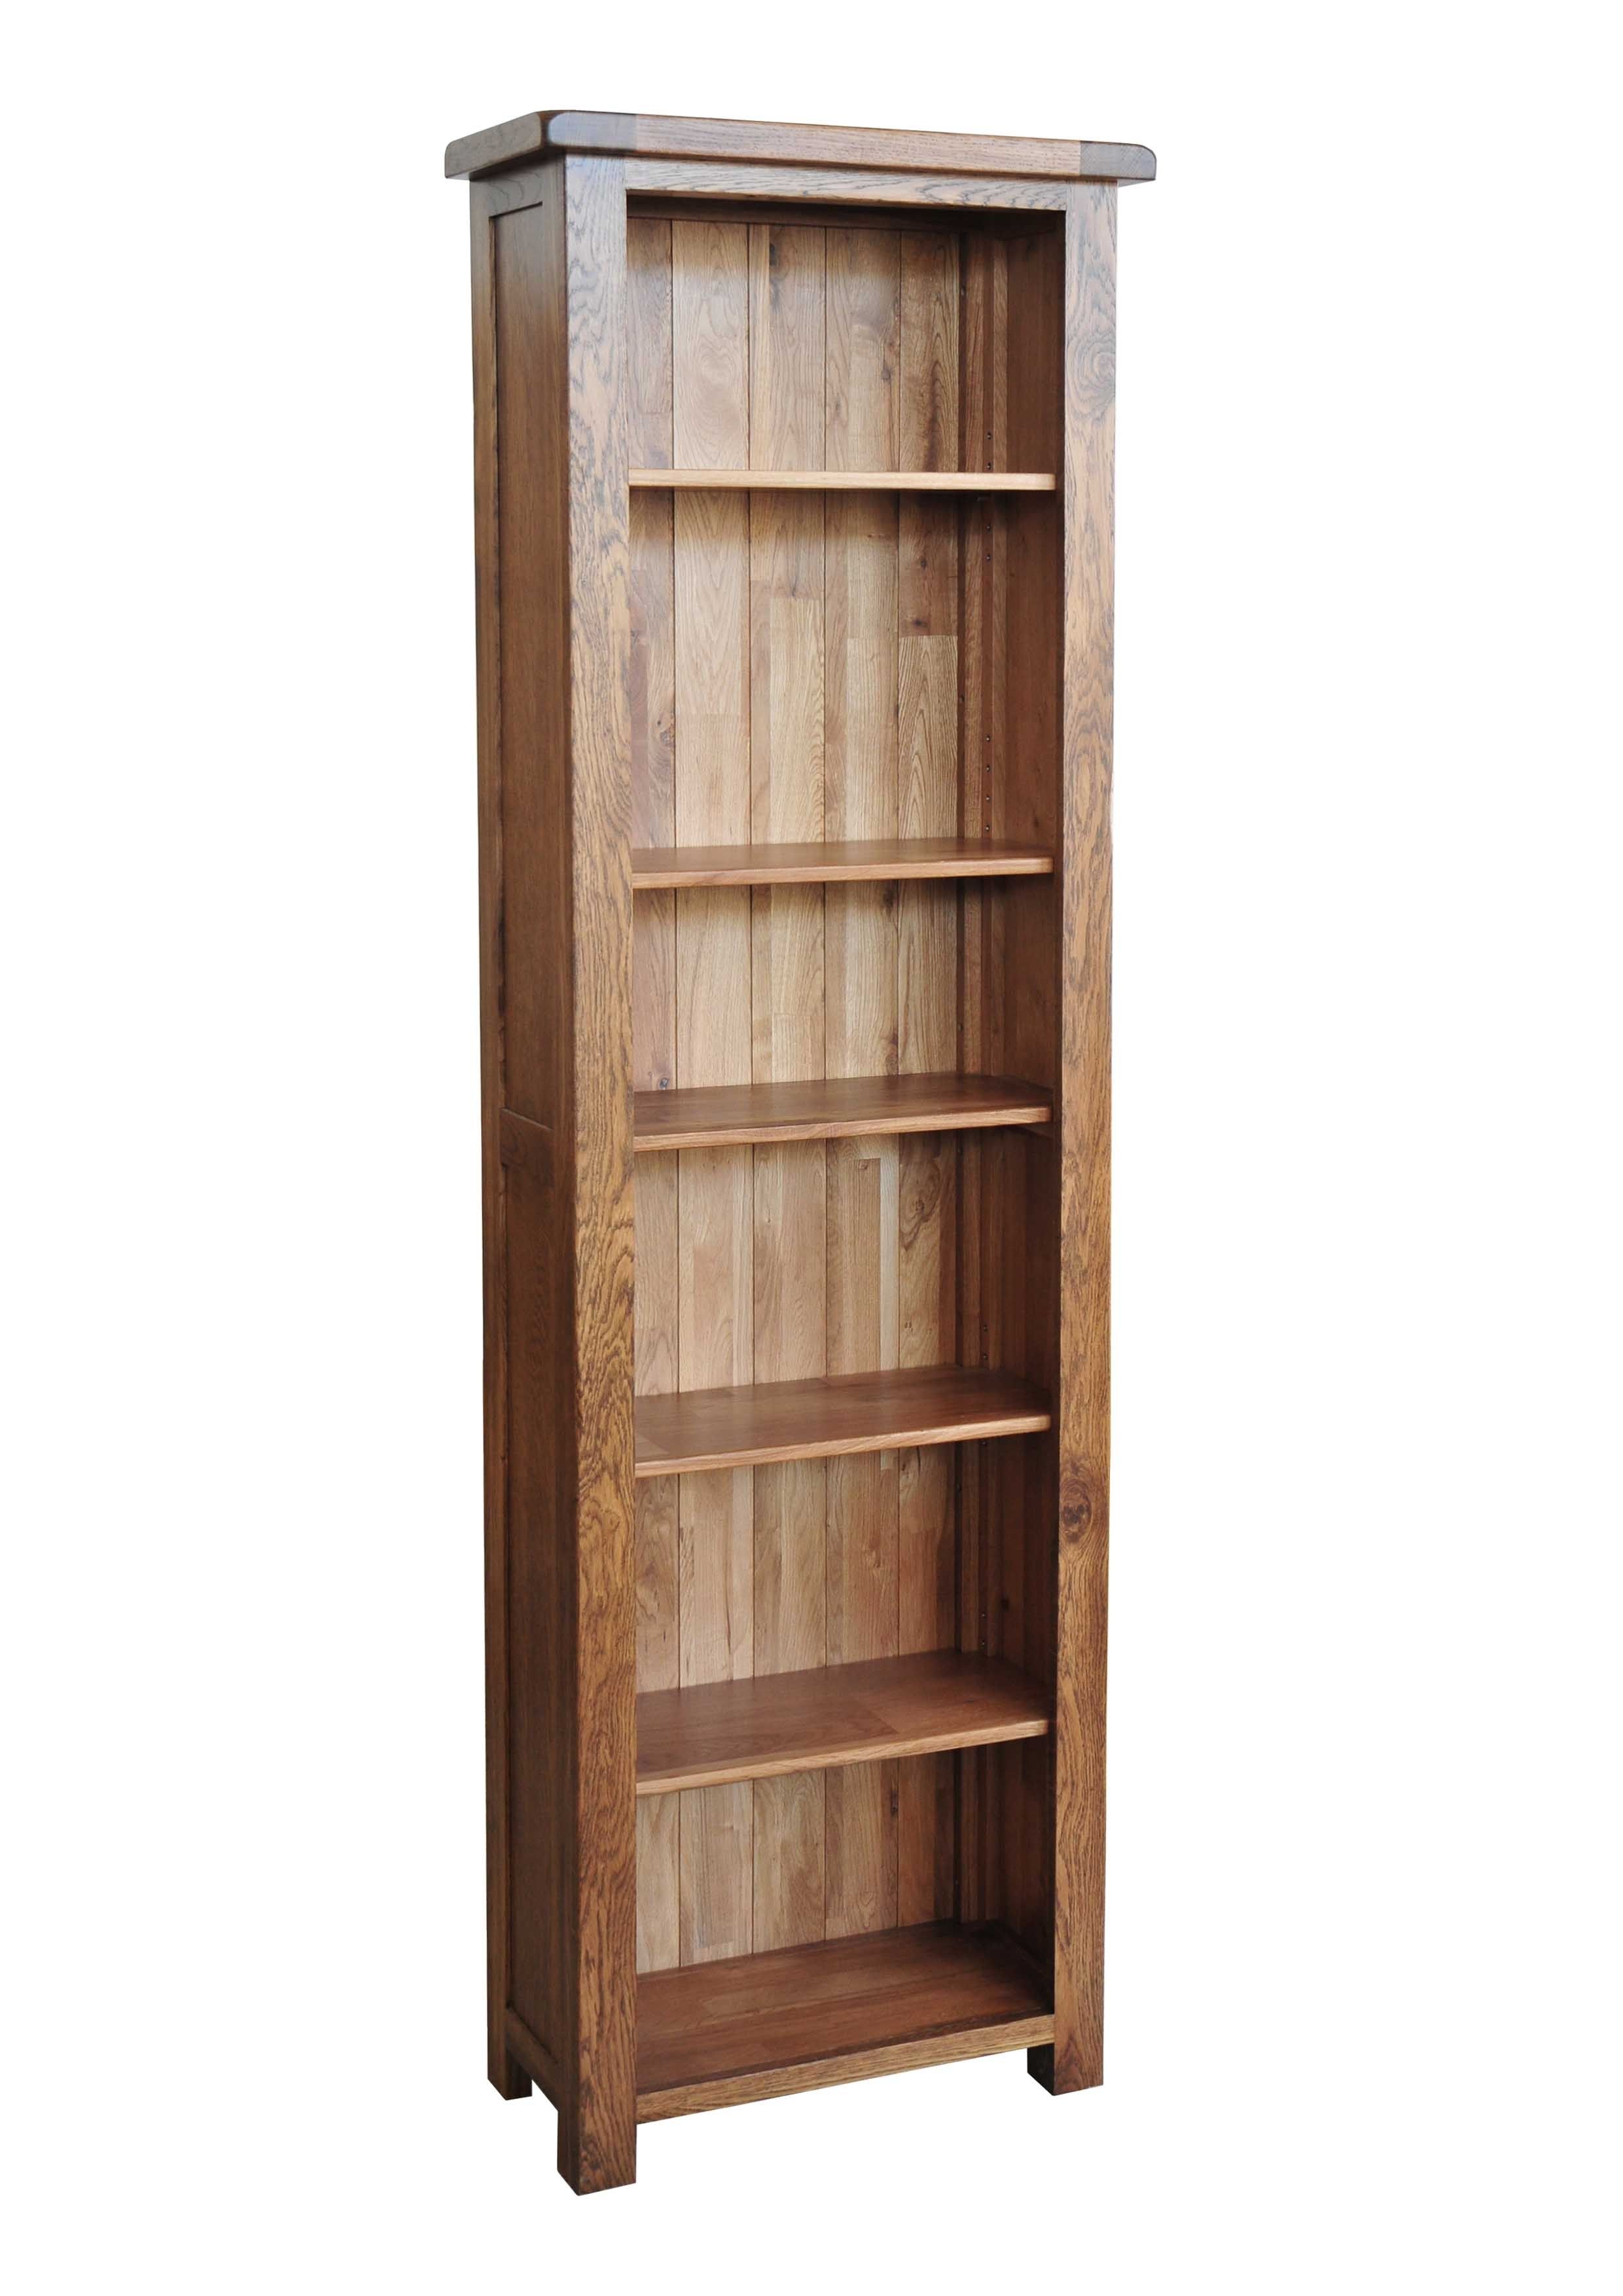 Beautiful Narrow Wood Bookcase Images Design Tall Solid Inside Well Known Narrow Tall Bookcases (View 11 of 15)